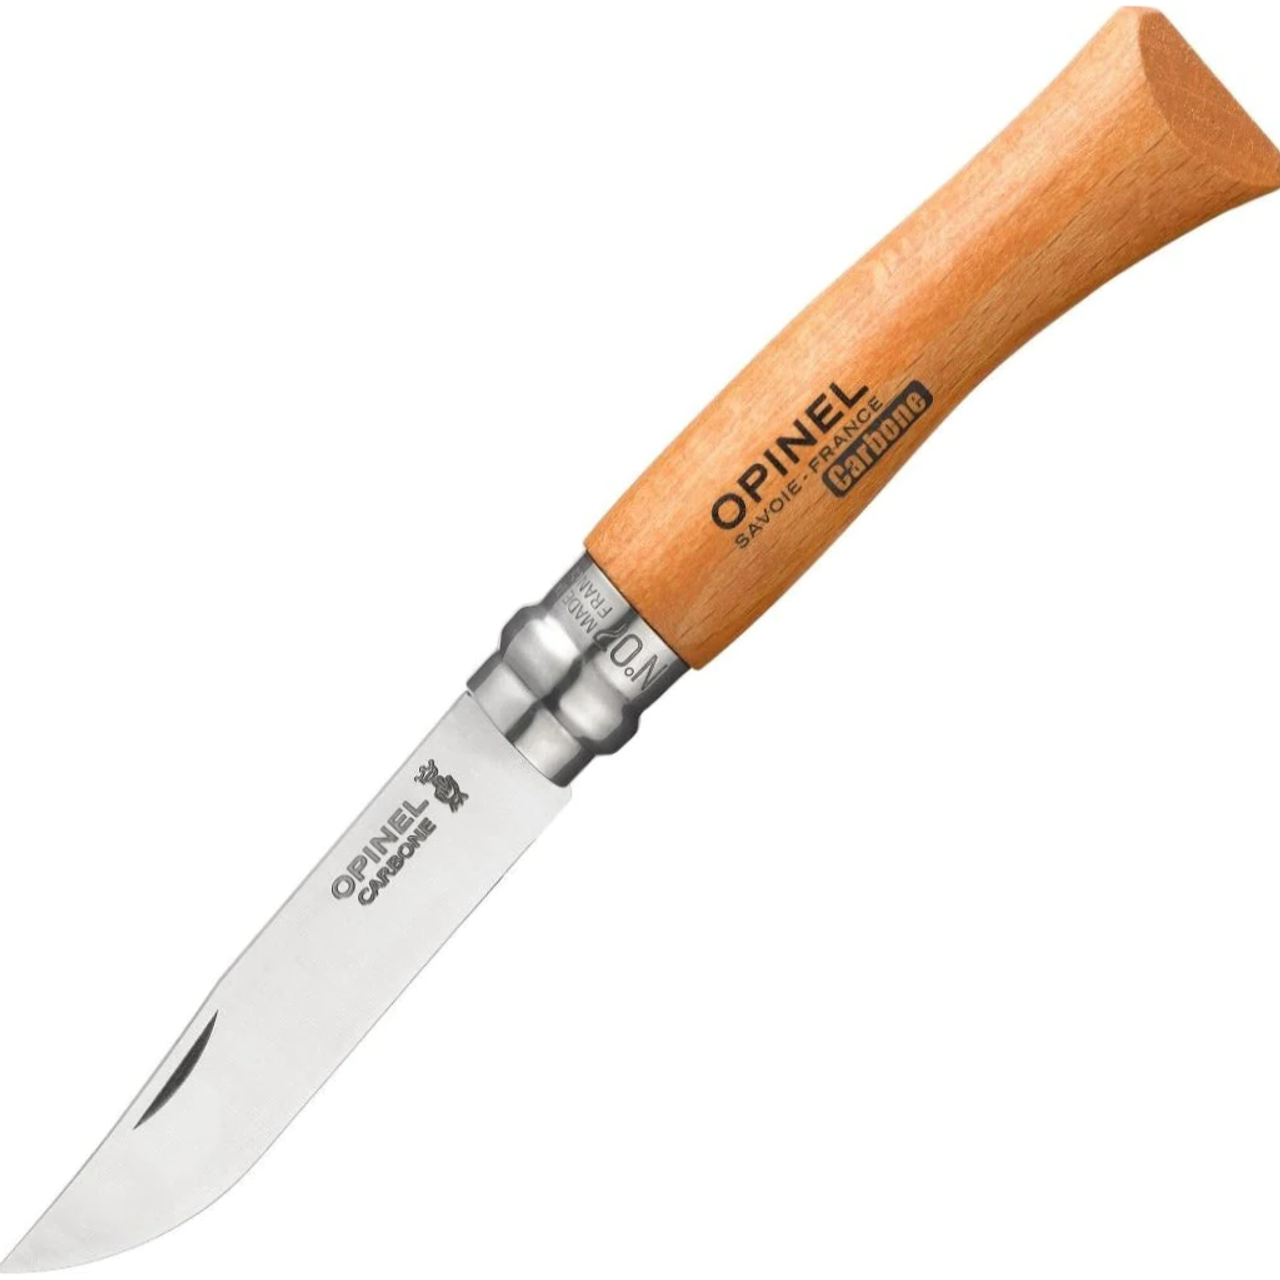 Opinel Knives No 07 Carbon Steel Folding Knife (OP113070) 3.07" Clip Point XC90 High Carbon Steel Plain Blade, Varnished Beech Wood Handle